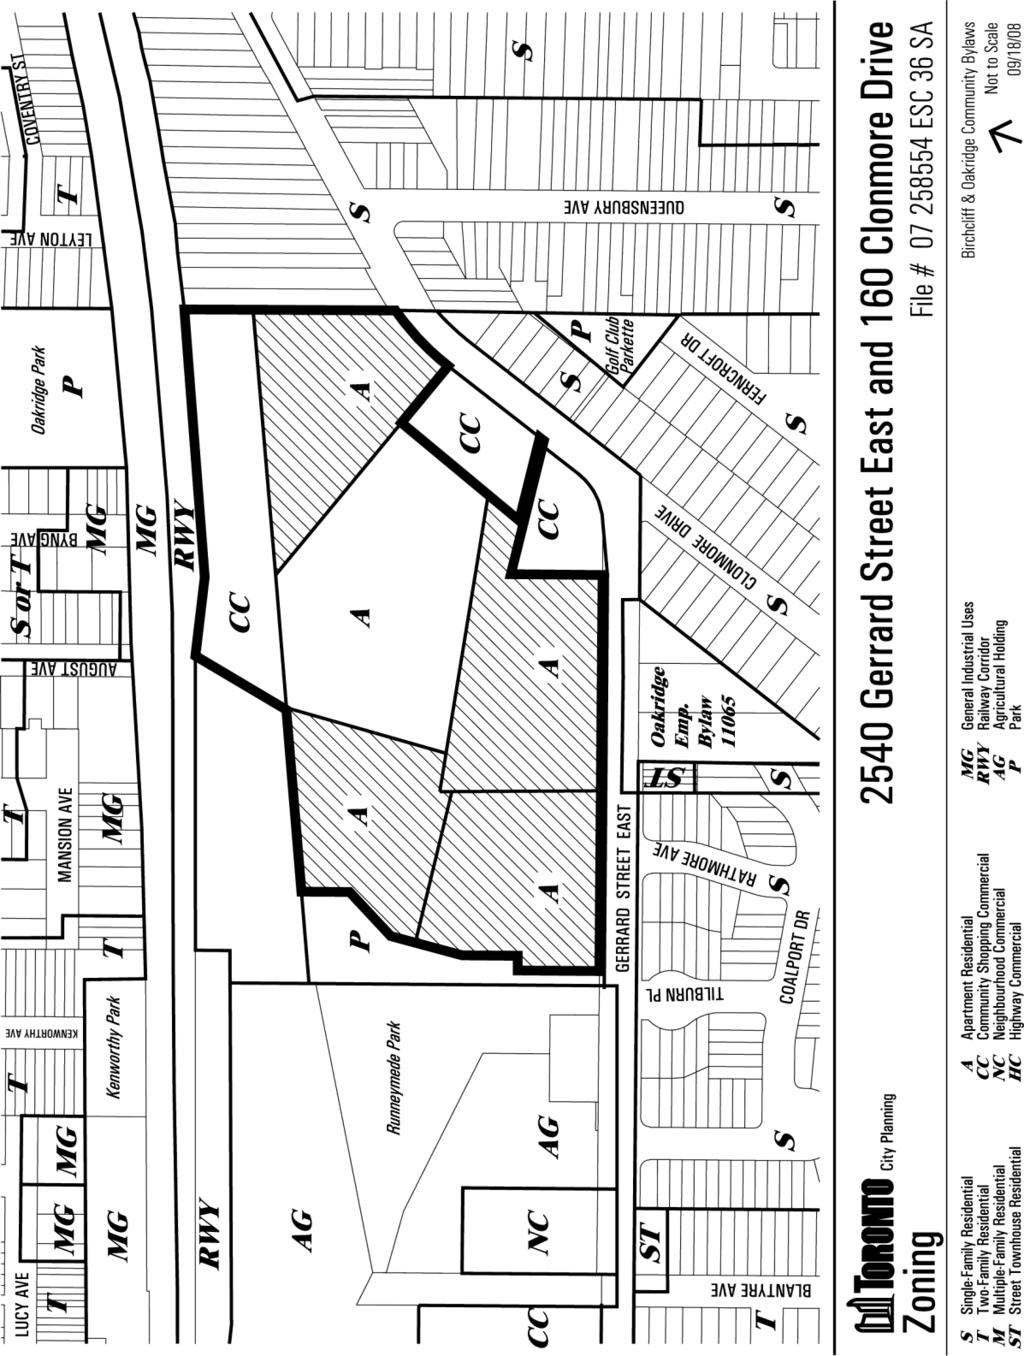 Attachment 3: Current Zoning Staff report for